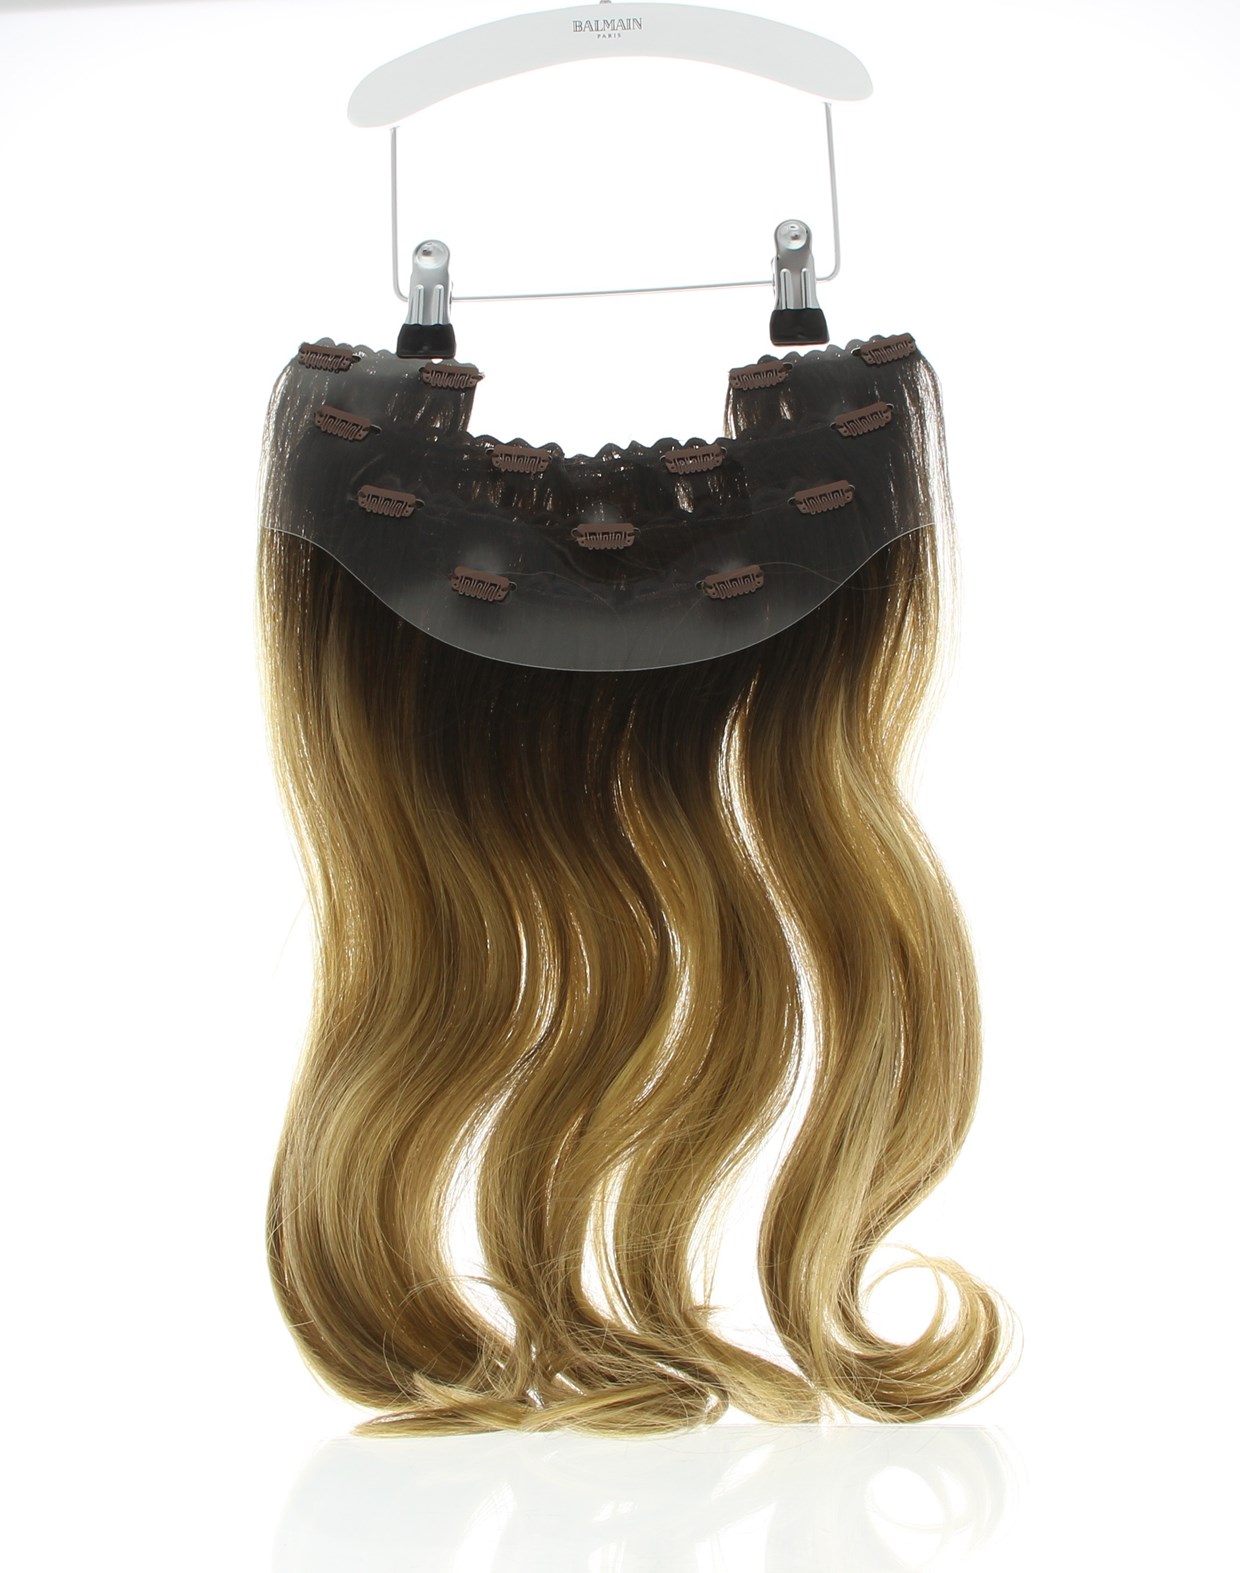 stap Paleis Geit Balmain Professional Professional Extensions Clip-in Weft Memory Hair 45cm Extension  kopen | Beauty Plaza